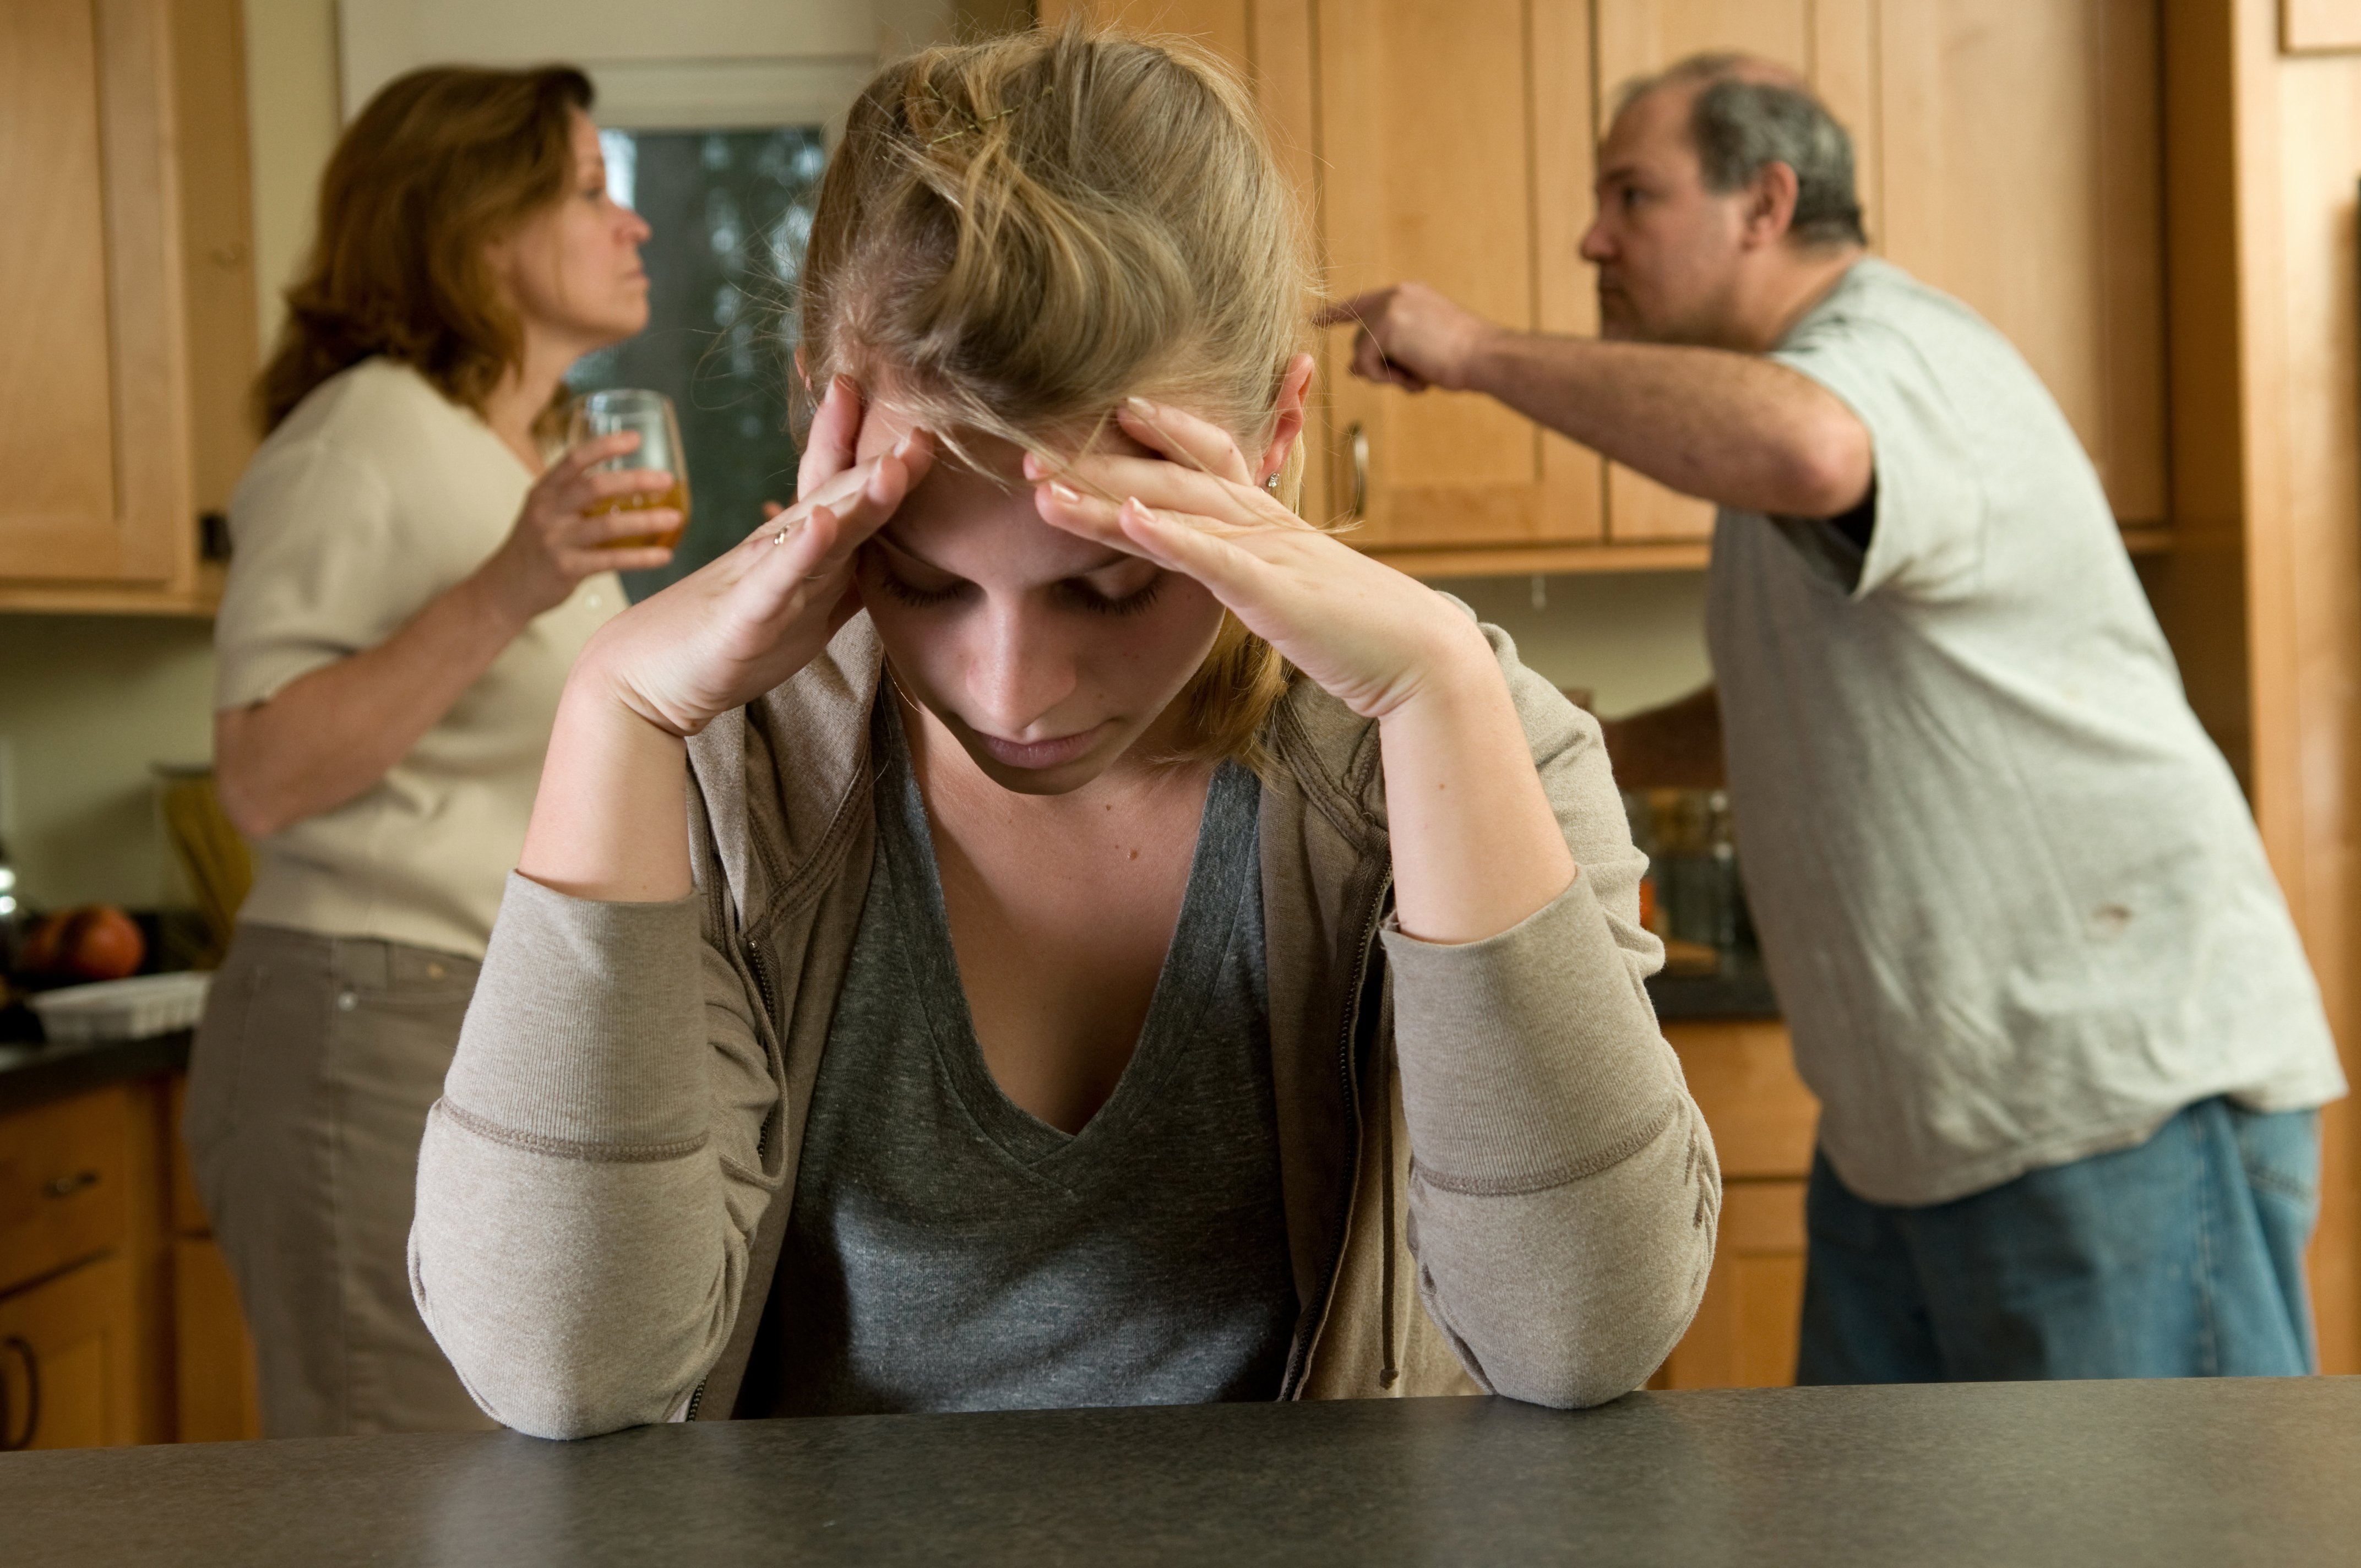 A young woman struggles to listen to her parents fight | Source: Shutterstock